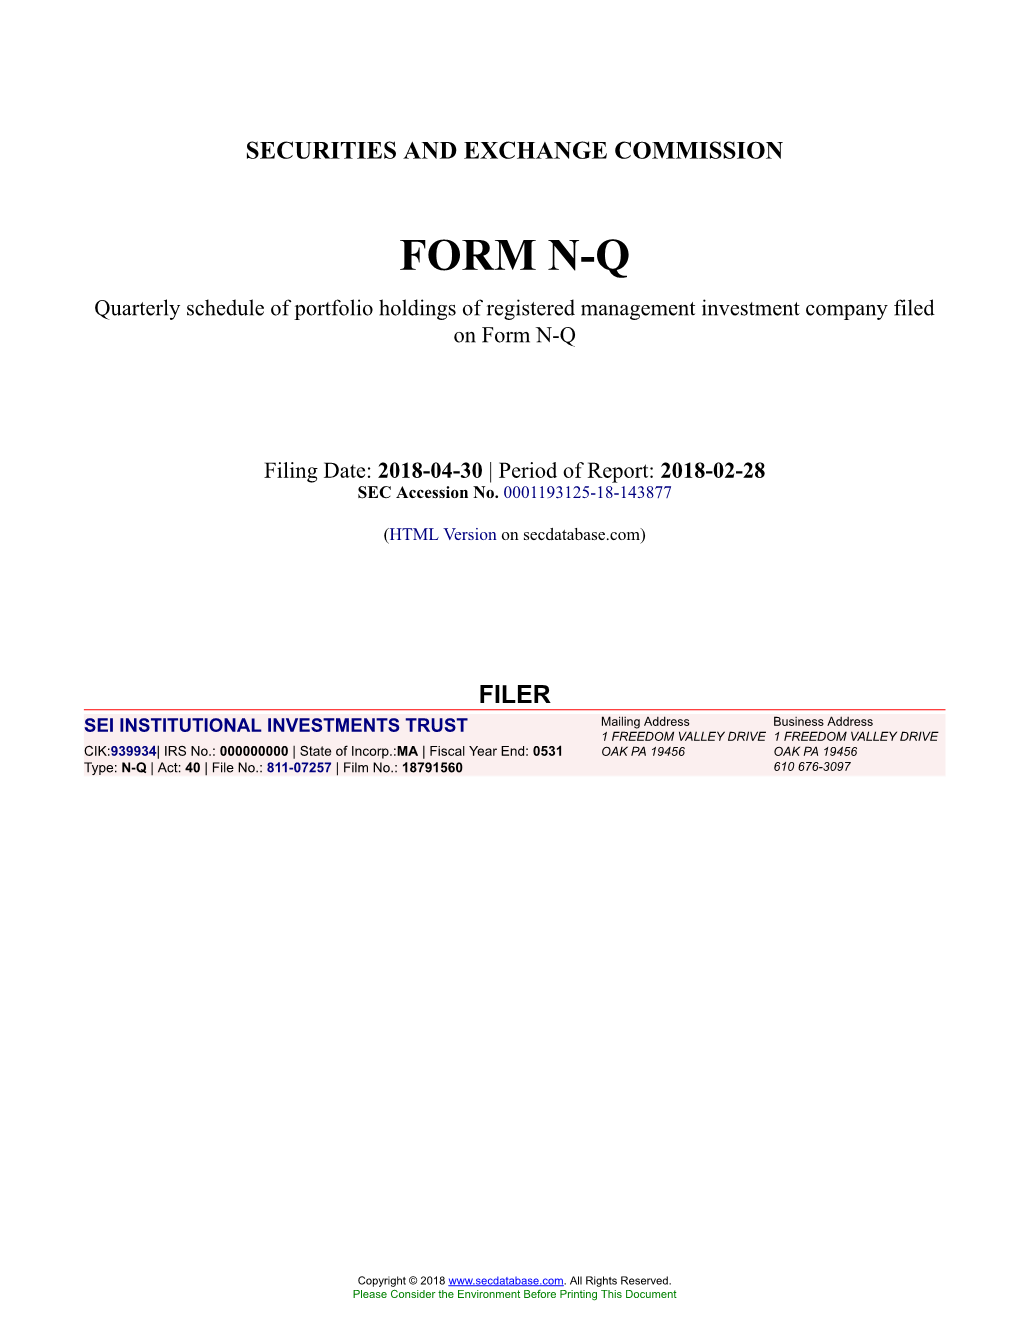 SEI INSTITUTIONAL INVESTMENTS TRUST Form N-Q Filed 2018-04-30